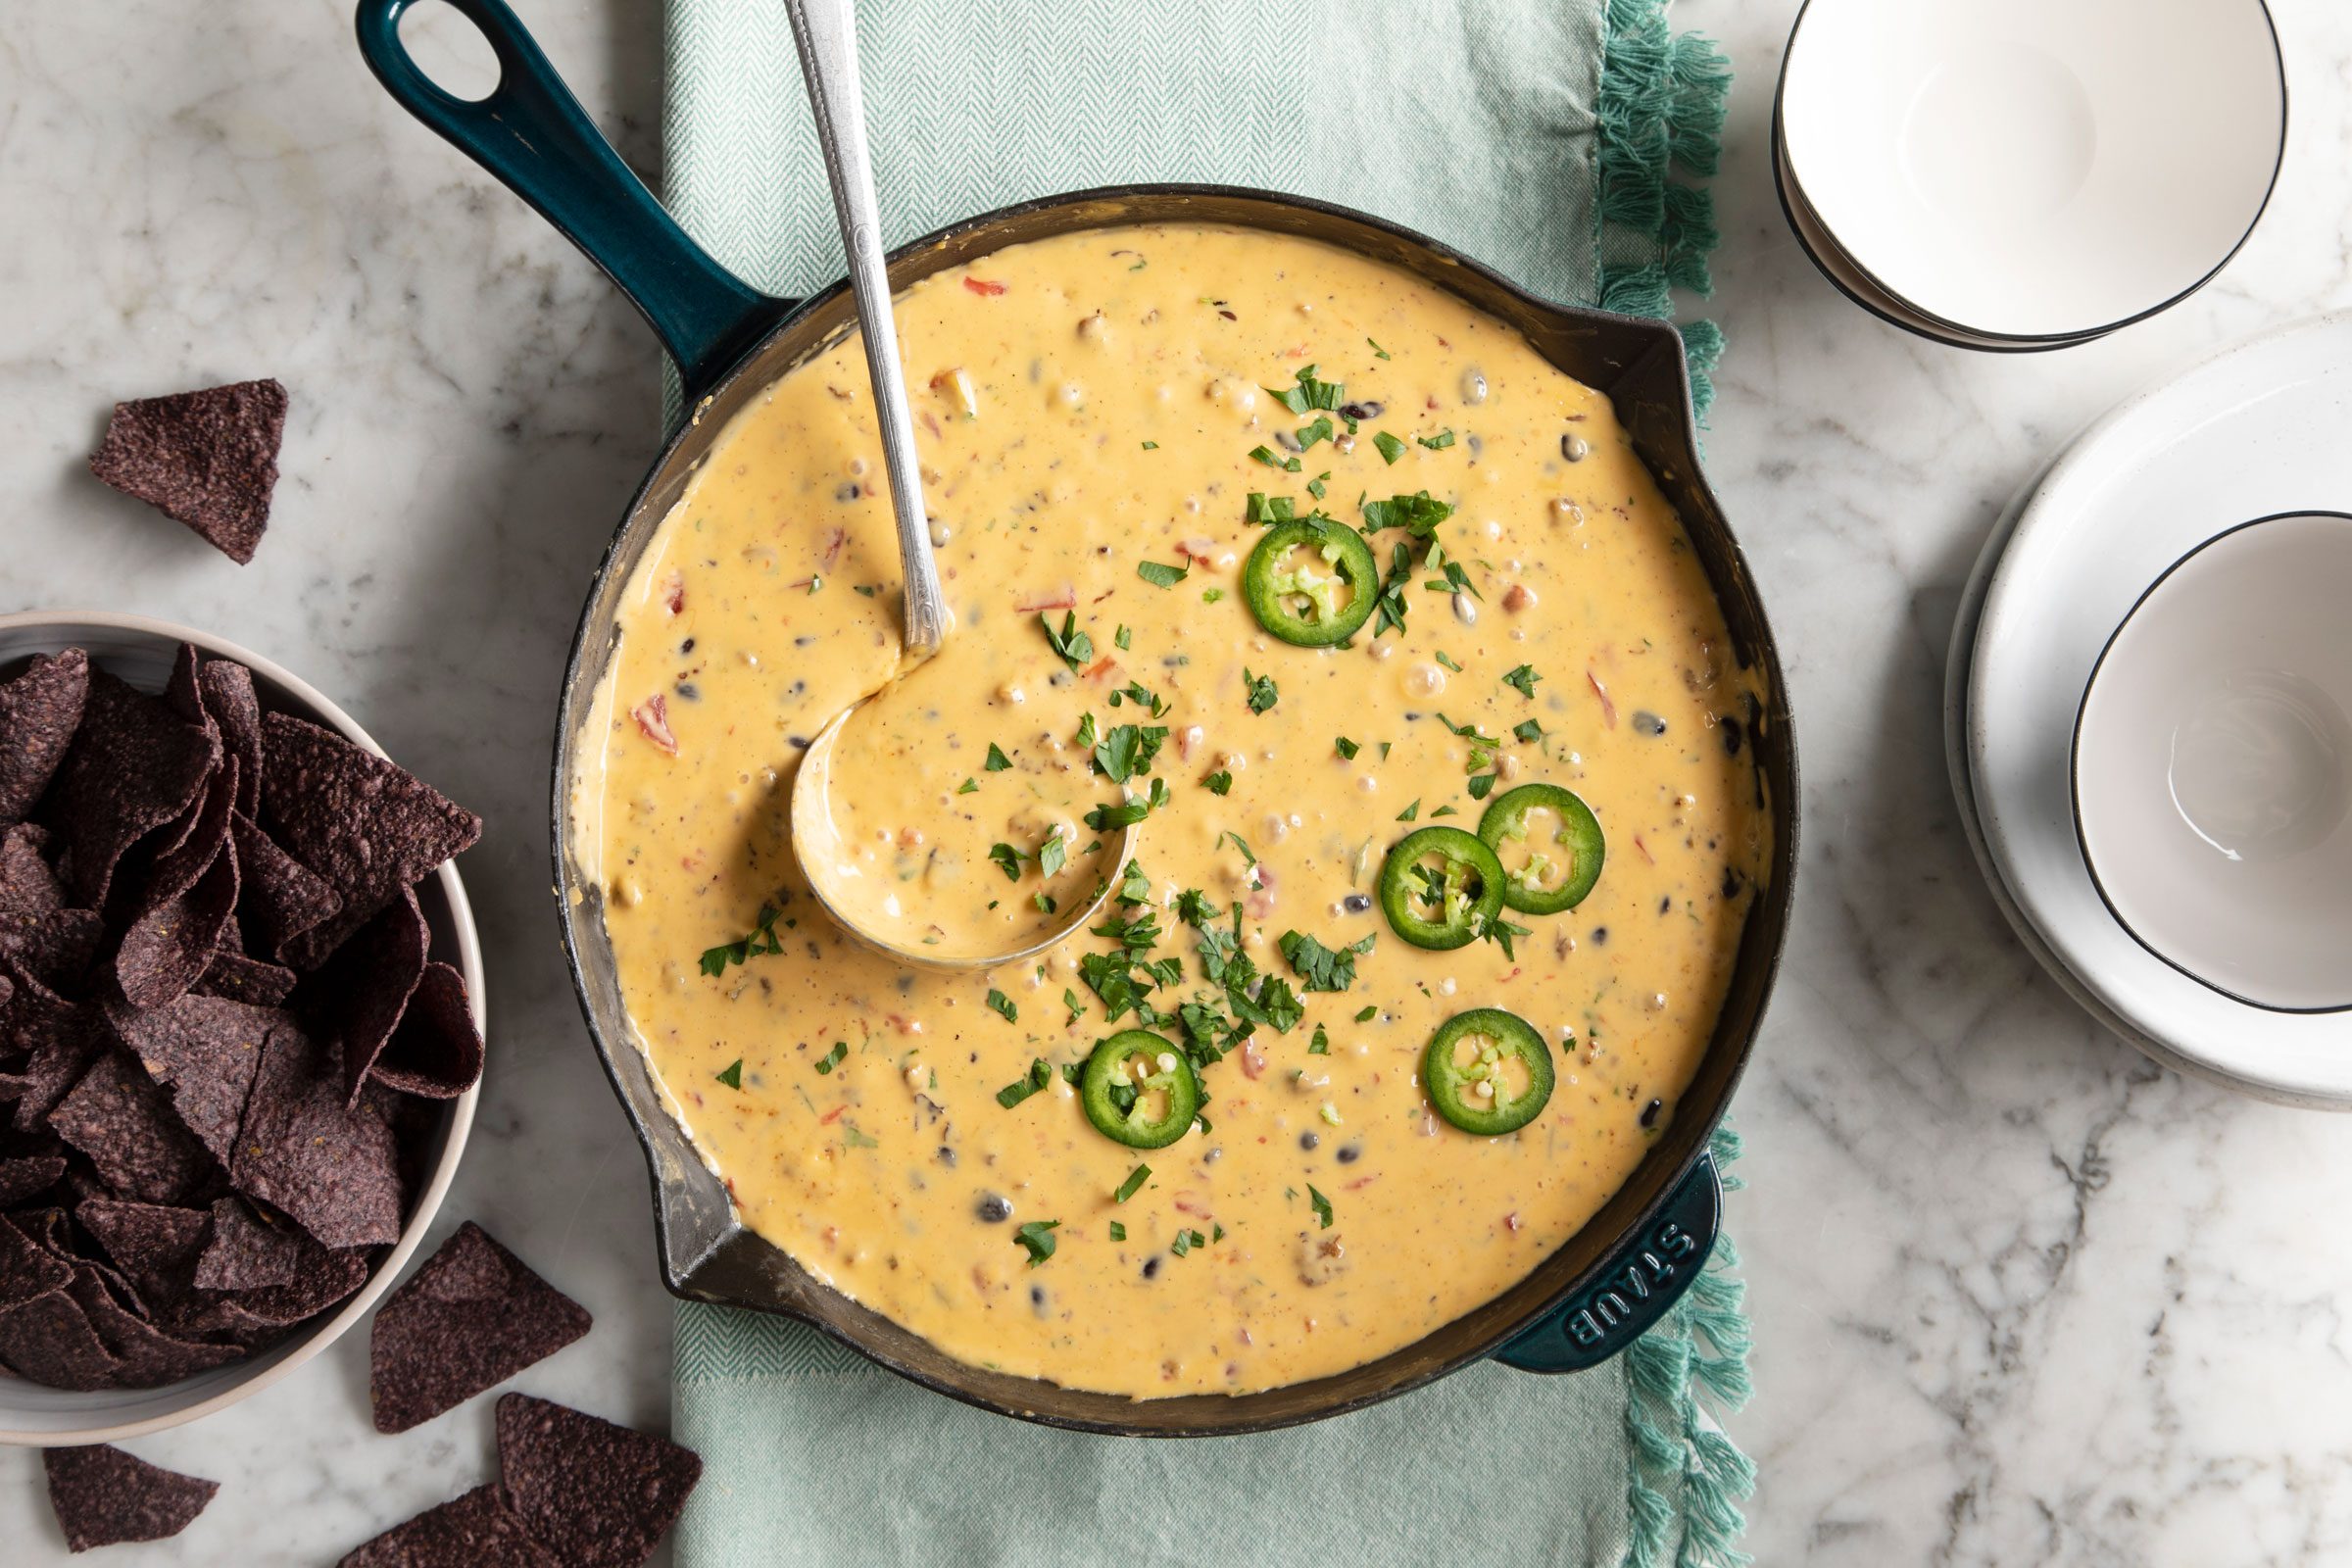 Cowboy Queso Recipe: How to Make It